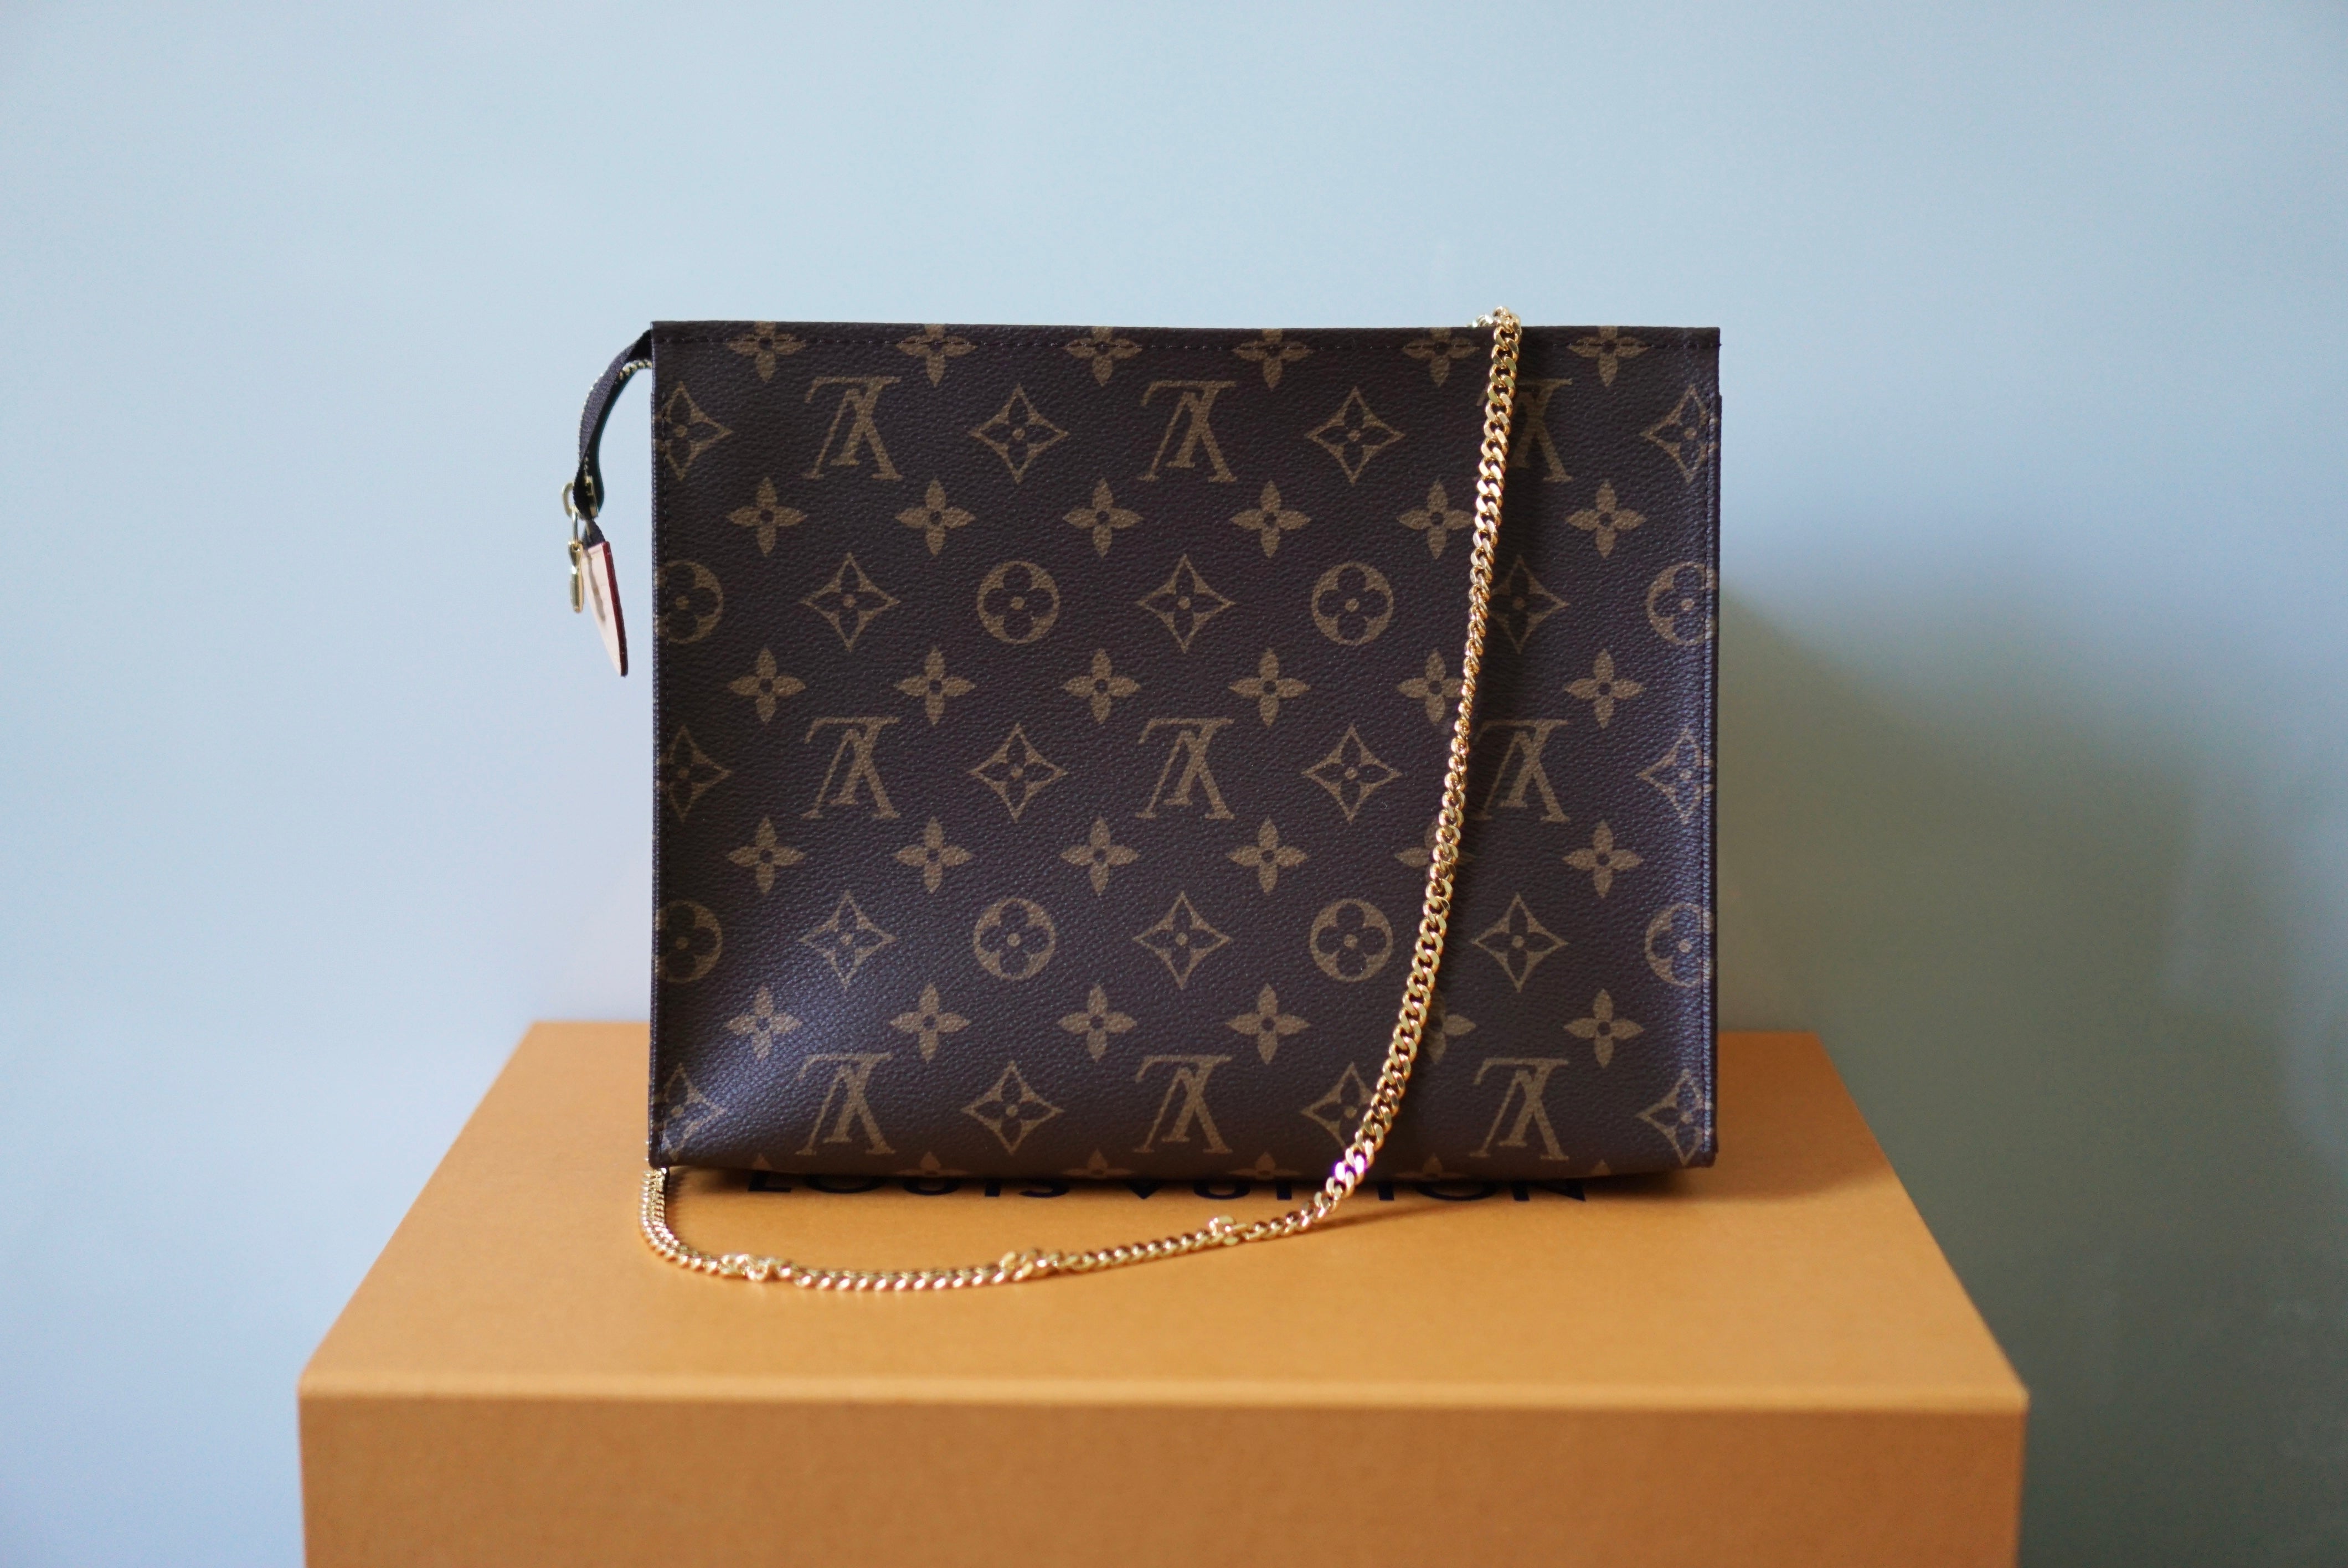 How to turn your Louis Vuitton Toiletry 26 into a crossbody bag